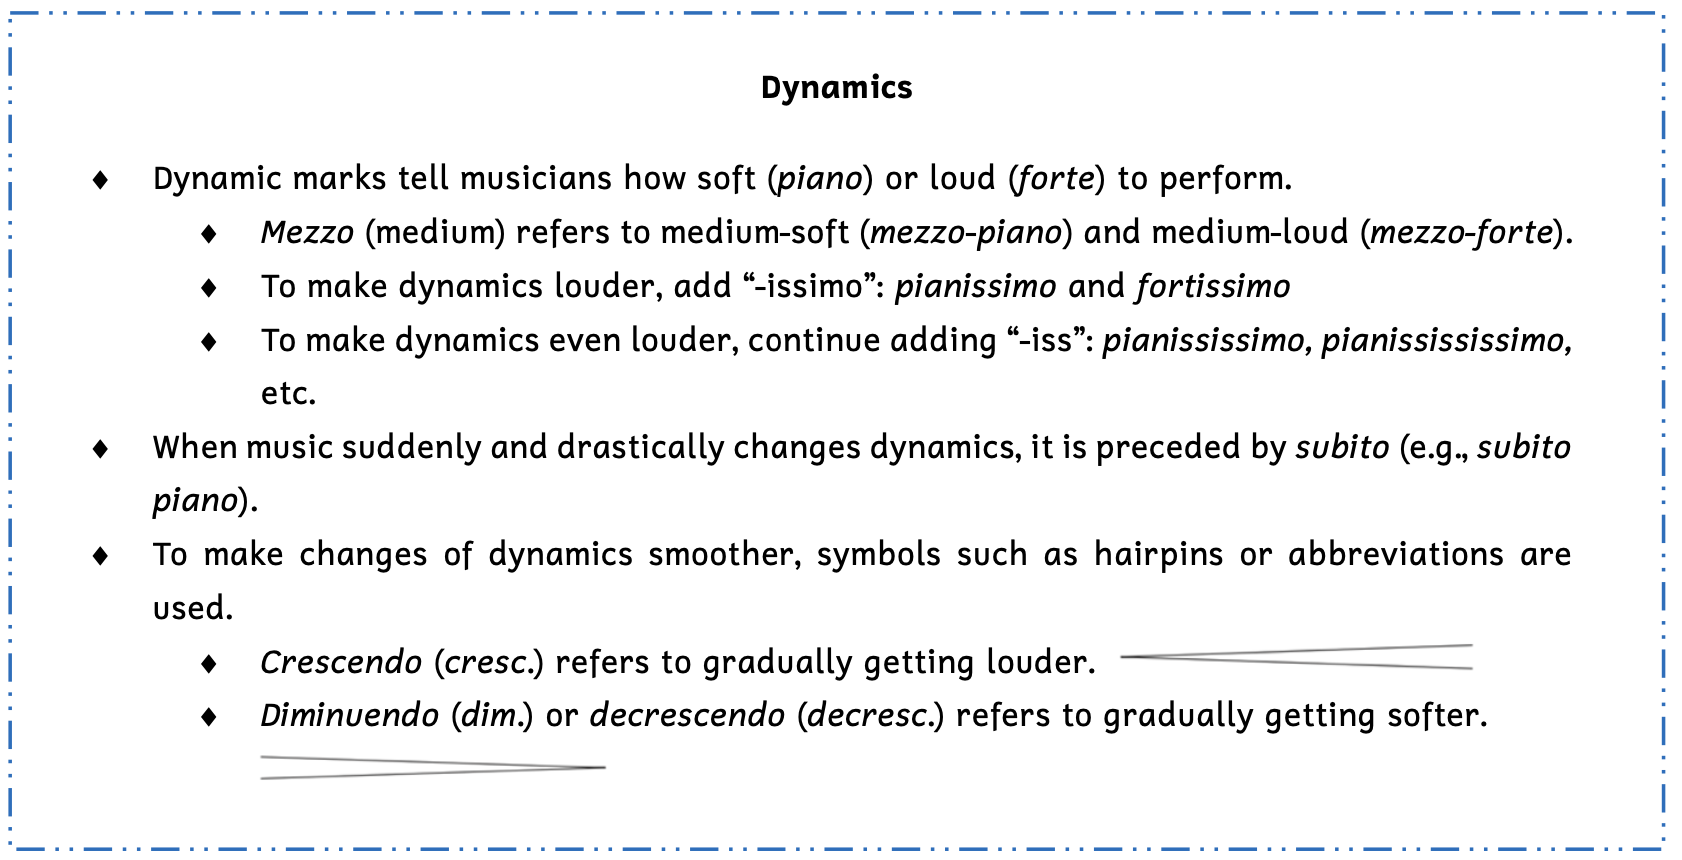 Summary box on dynamics. Dynamic marks tell musicians how soft, called piano, or how loud, called forte, to perform. Mezzo means medium and refers to medium soft, called mezzopiano, or medium loud, called mezzoforte. To make dynamics louder, add -issimo, such as in pianissimo and fortissimo. To make dynamics even louder, continue adding I - S - S, such as pianississimo, pianissississimo, and so on. When music suddenly and drastically changes dynamics, it is preceded by subito. For example, subito piano. To make changes of dynamics smoother, symbols such as hairpins or abbreviations are used. Crescendo refers to gradually getting louder and diminuendo or decrescendo refers to gradually getting softer.